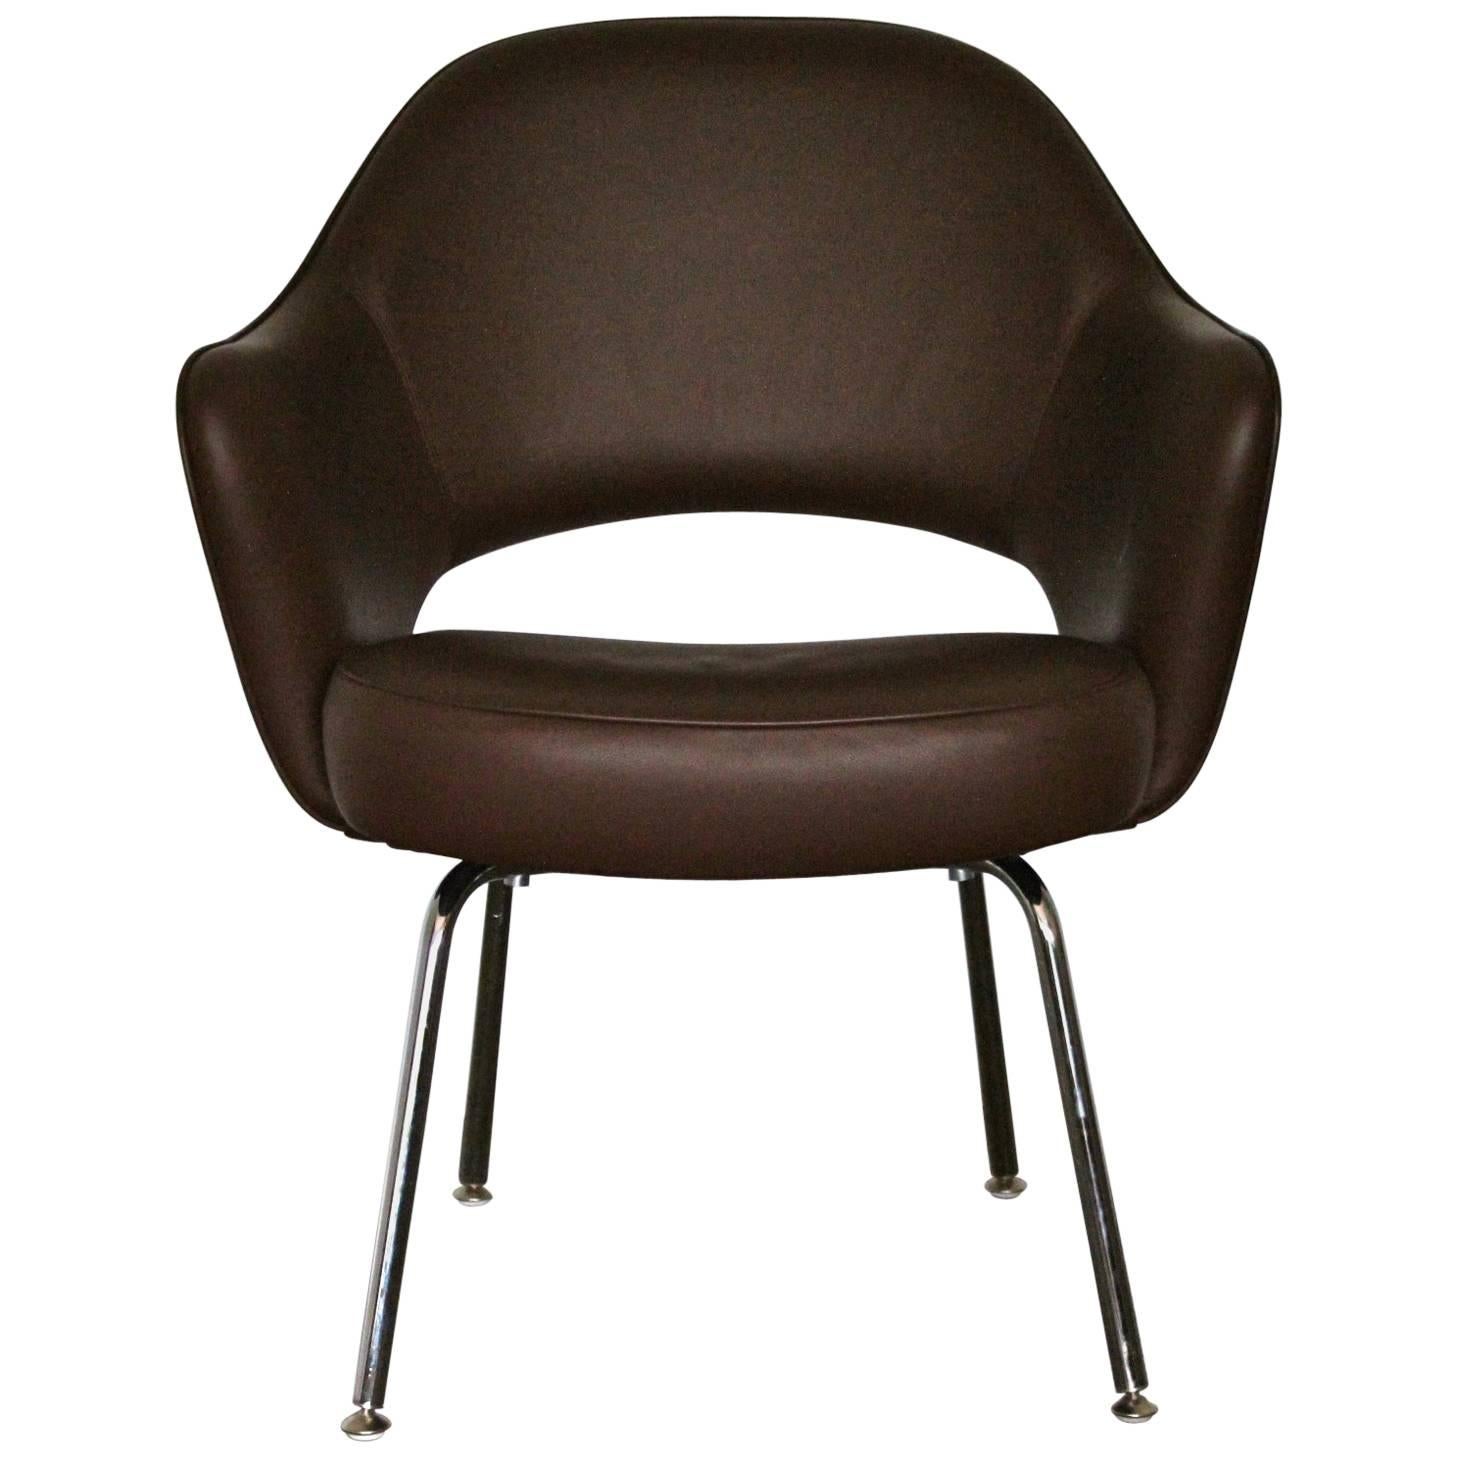 Knoll Studio “Saarinen Executive” Armchair in “Volo” Brown Leather For Sale